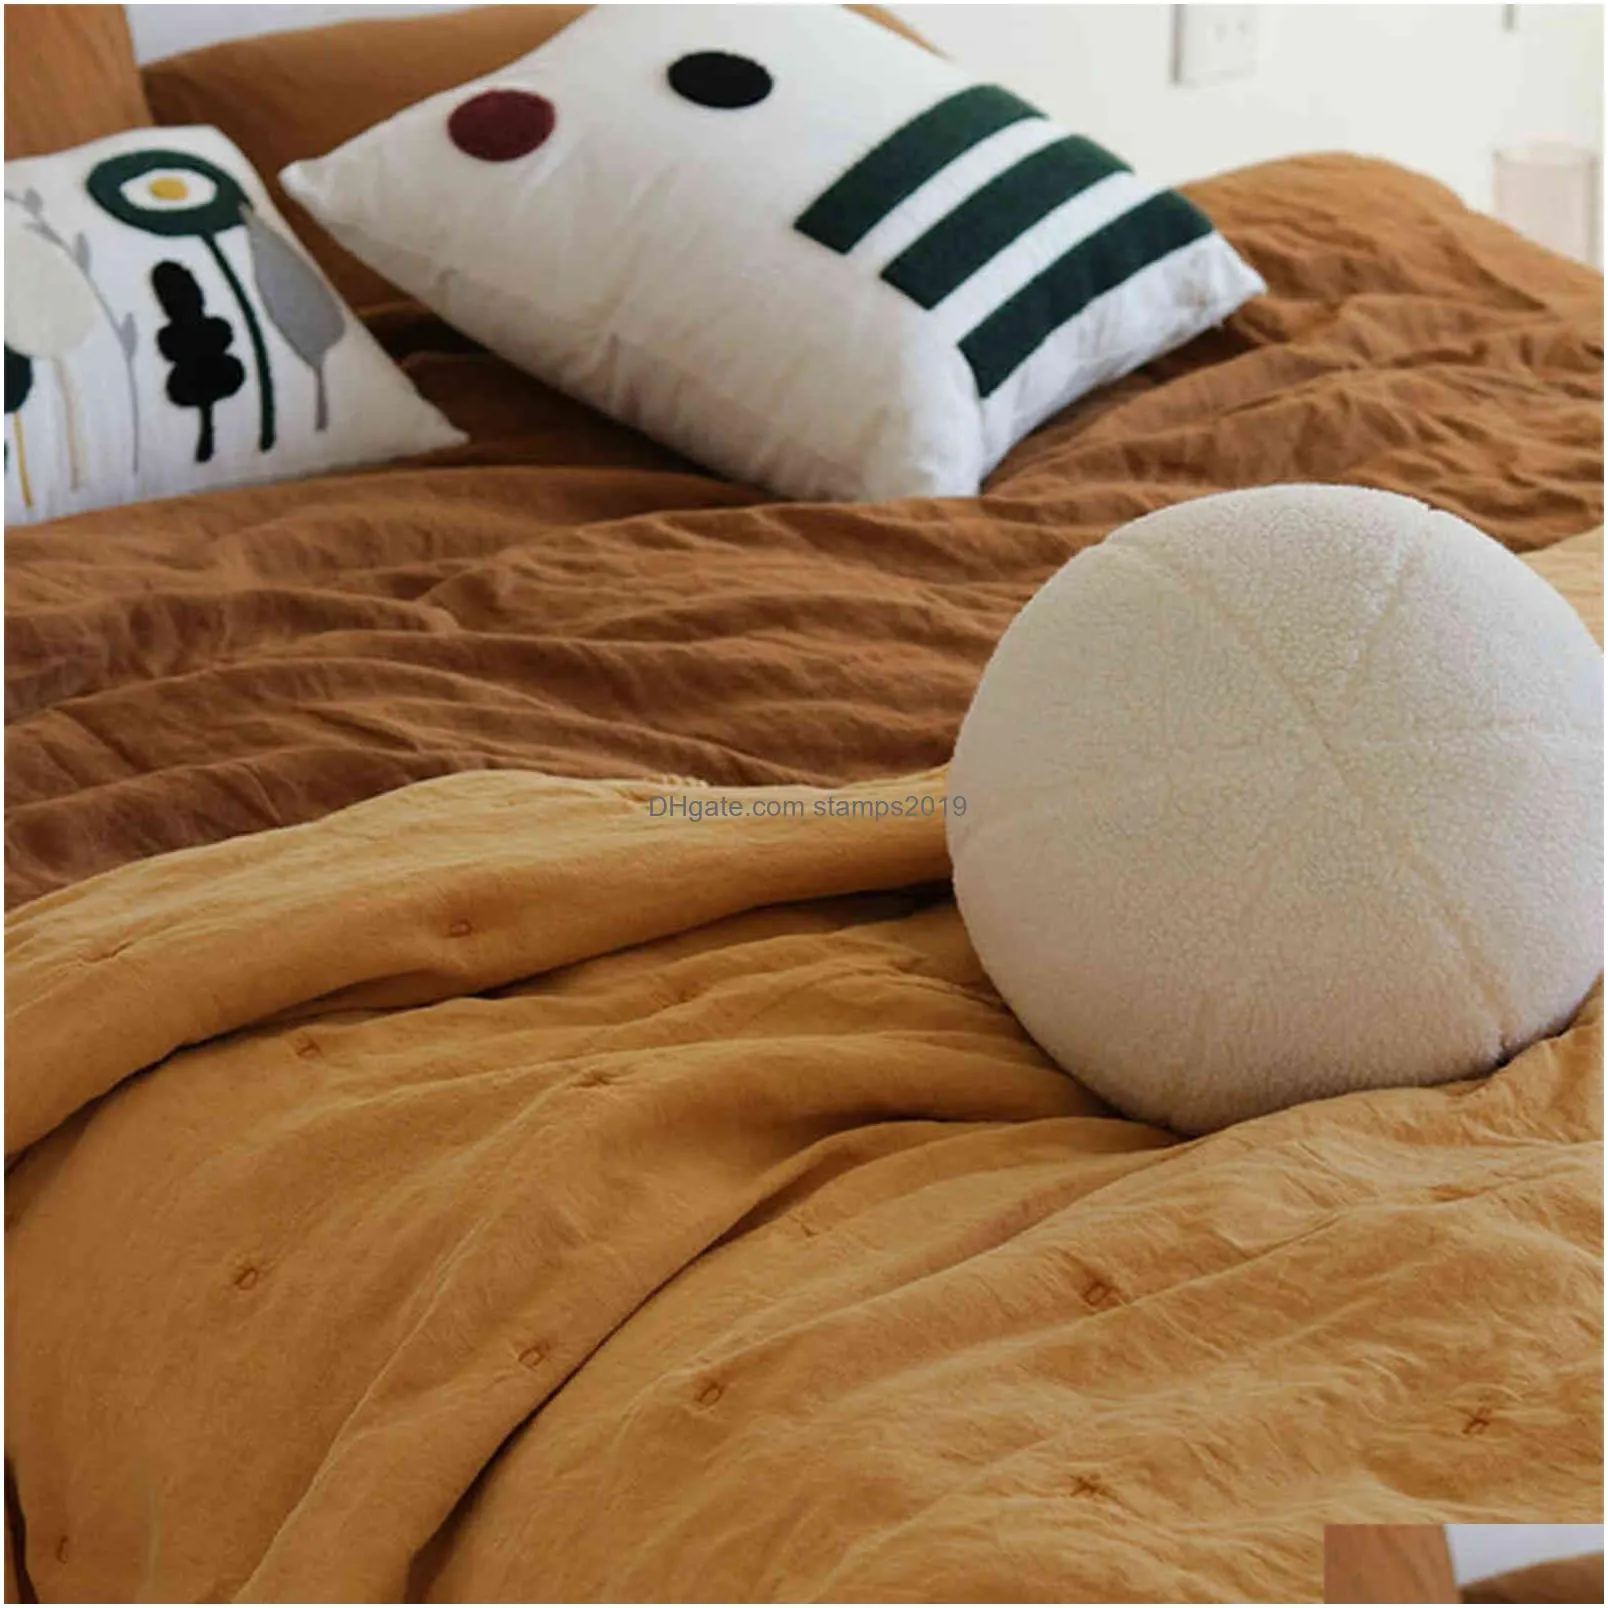 bubble kiss nordic ball shaped solid color stuffed plush pillow for sofa seat decorative cushion soft office waist rest 211102